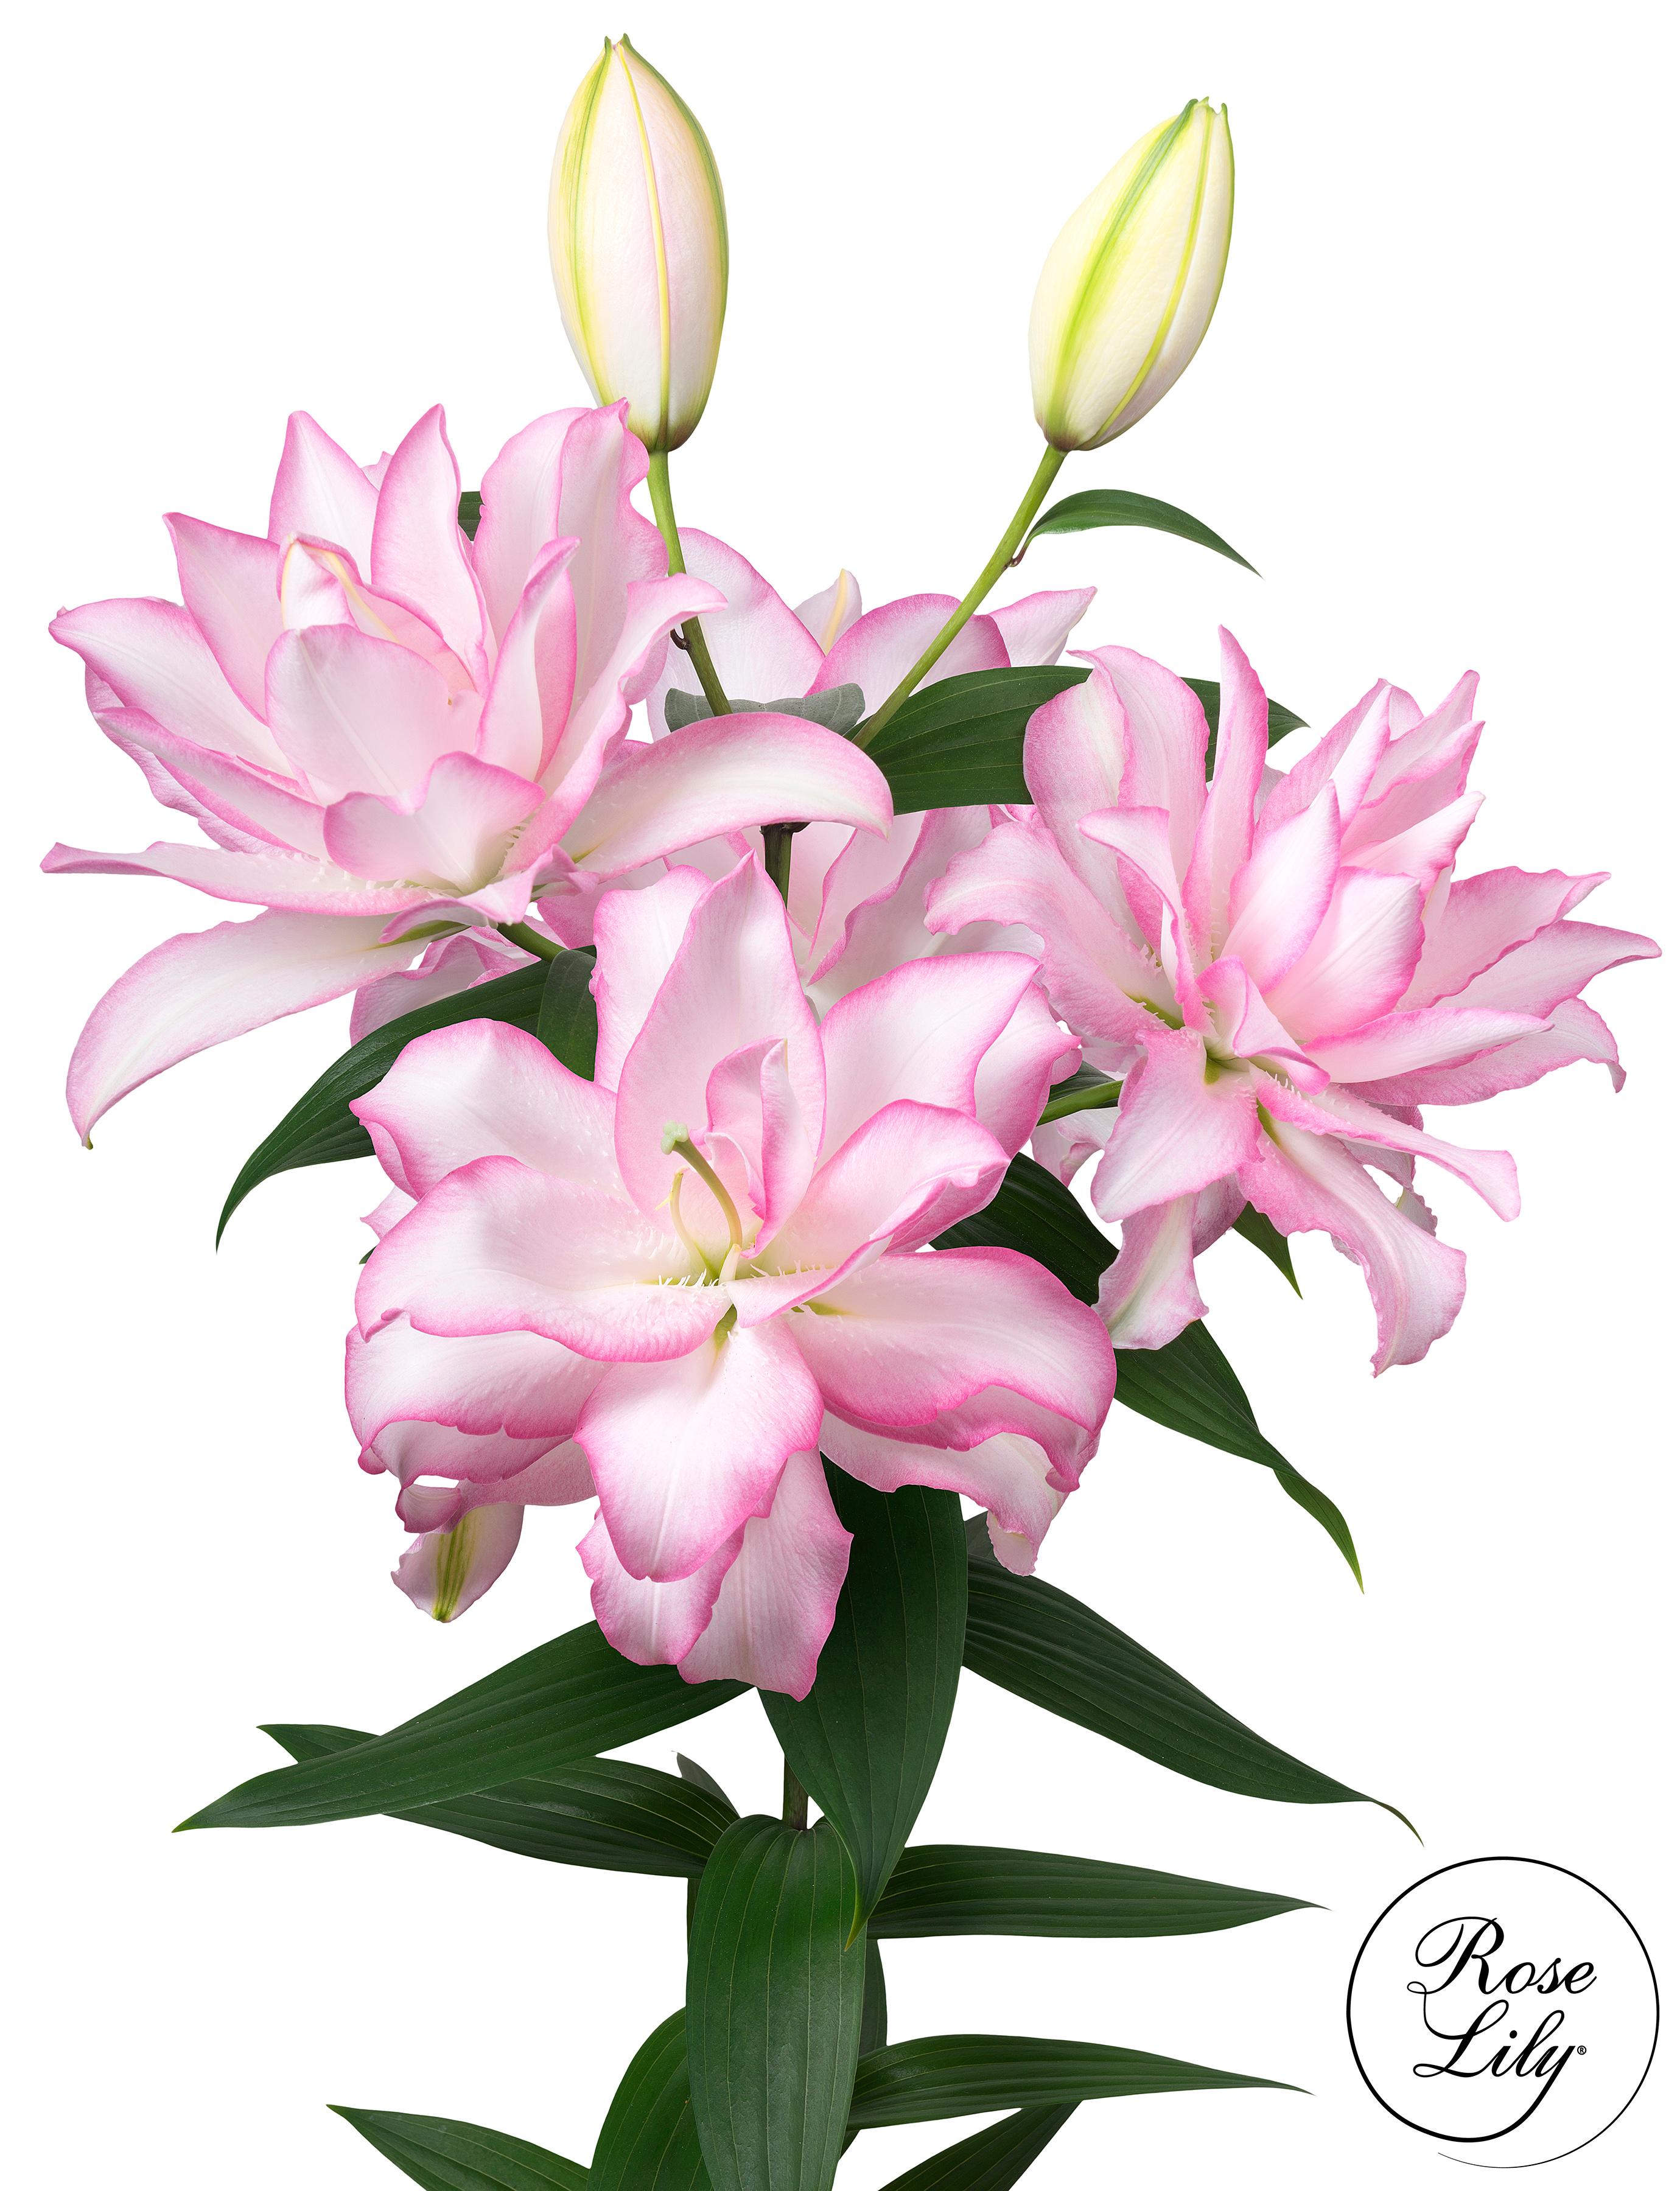 Lilies Double Oriental 'Roselily Anouska' - Double Oriental Lilies from Leo Berbee Bulb Company